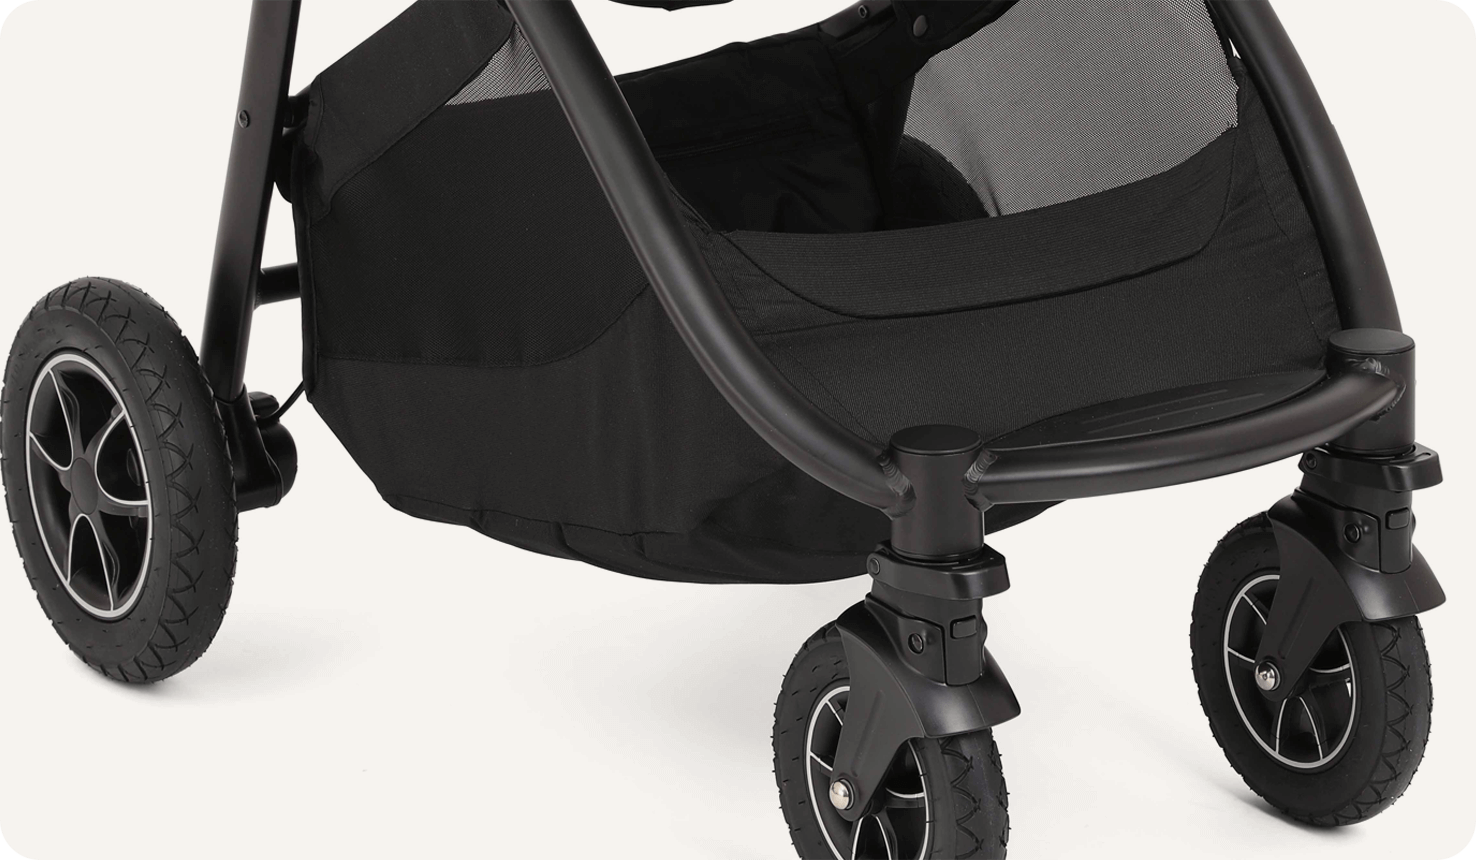 Zoomed in view of the storage basket on a Joie versatrax pram.